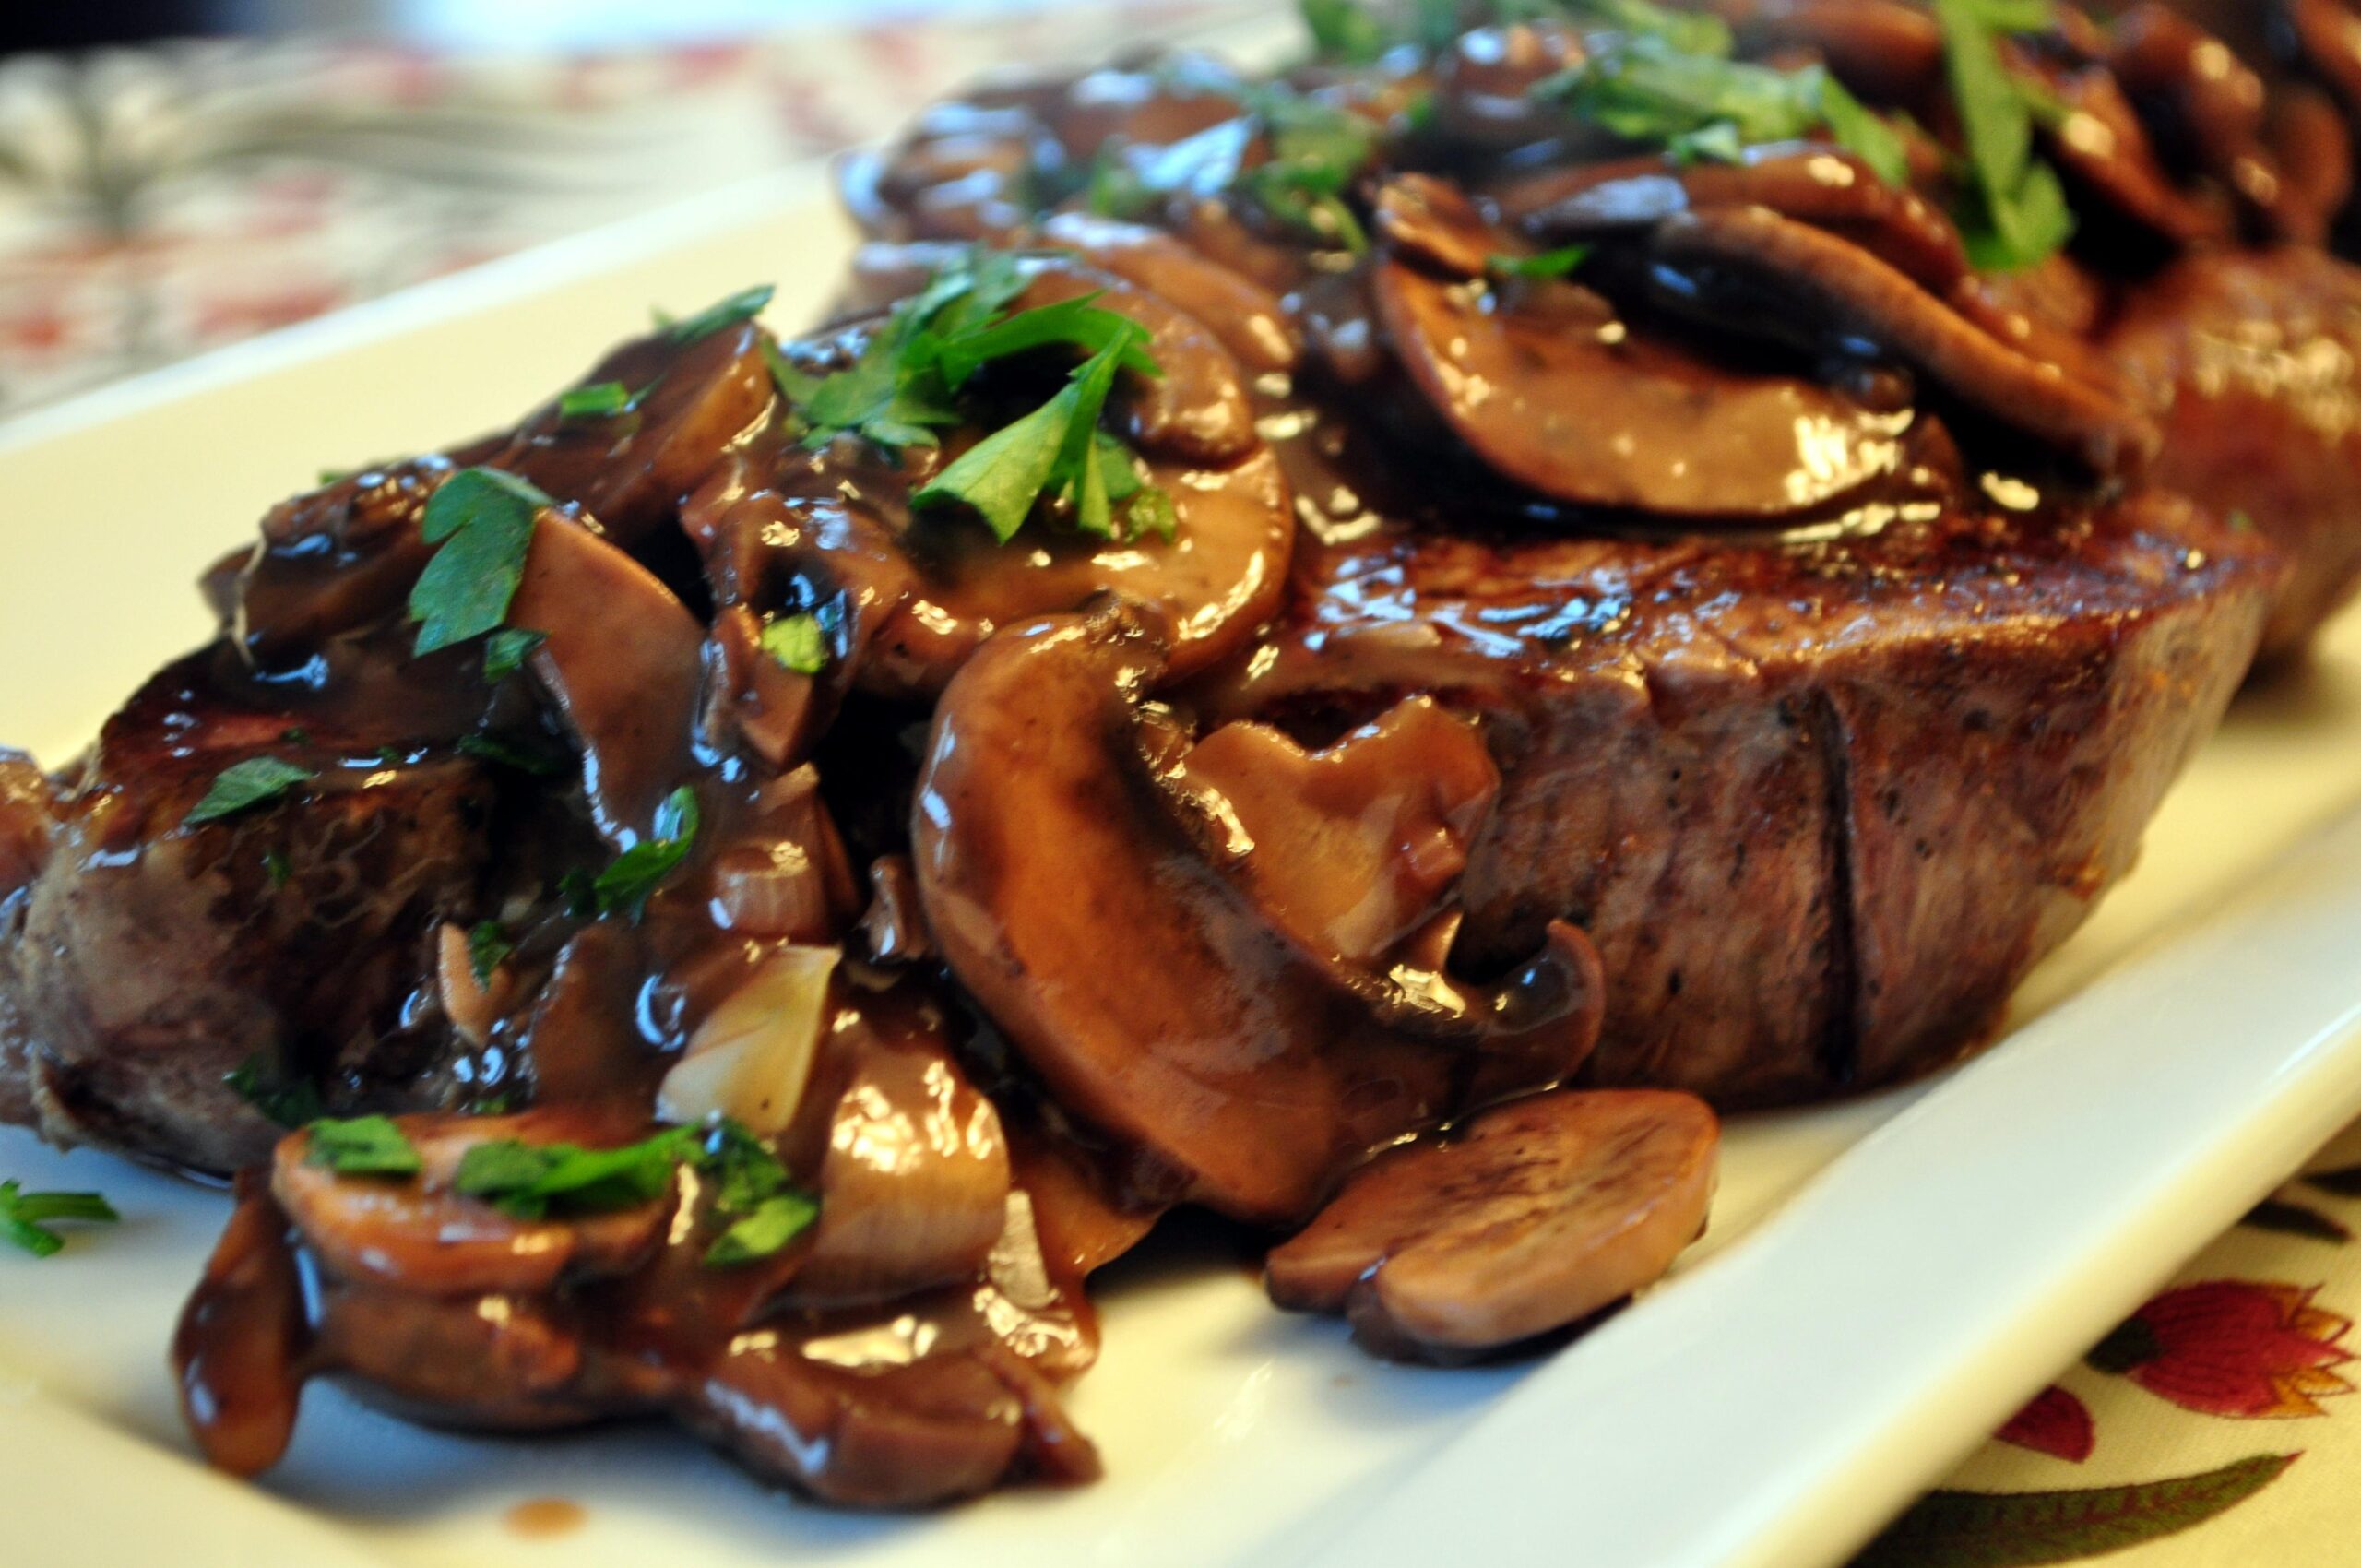  Elevate your steak dinner with an exquisite sauce made from mushrooms and wine.